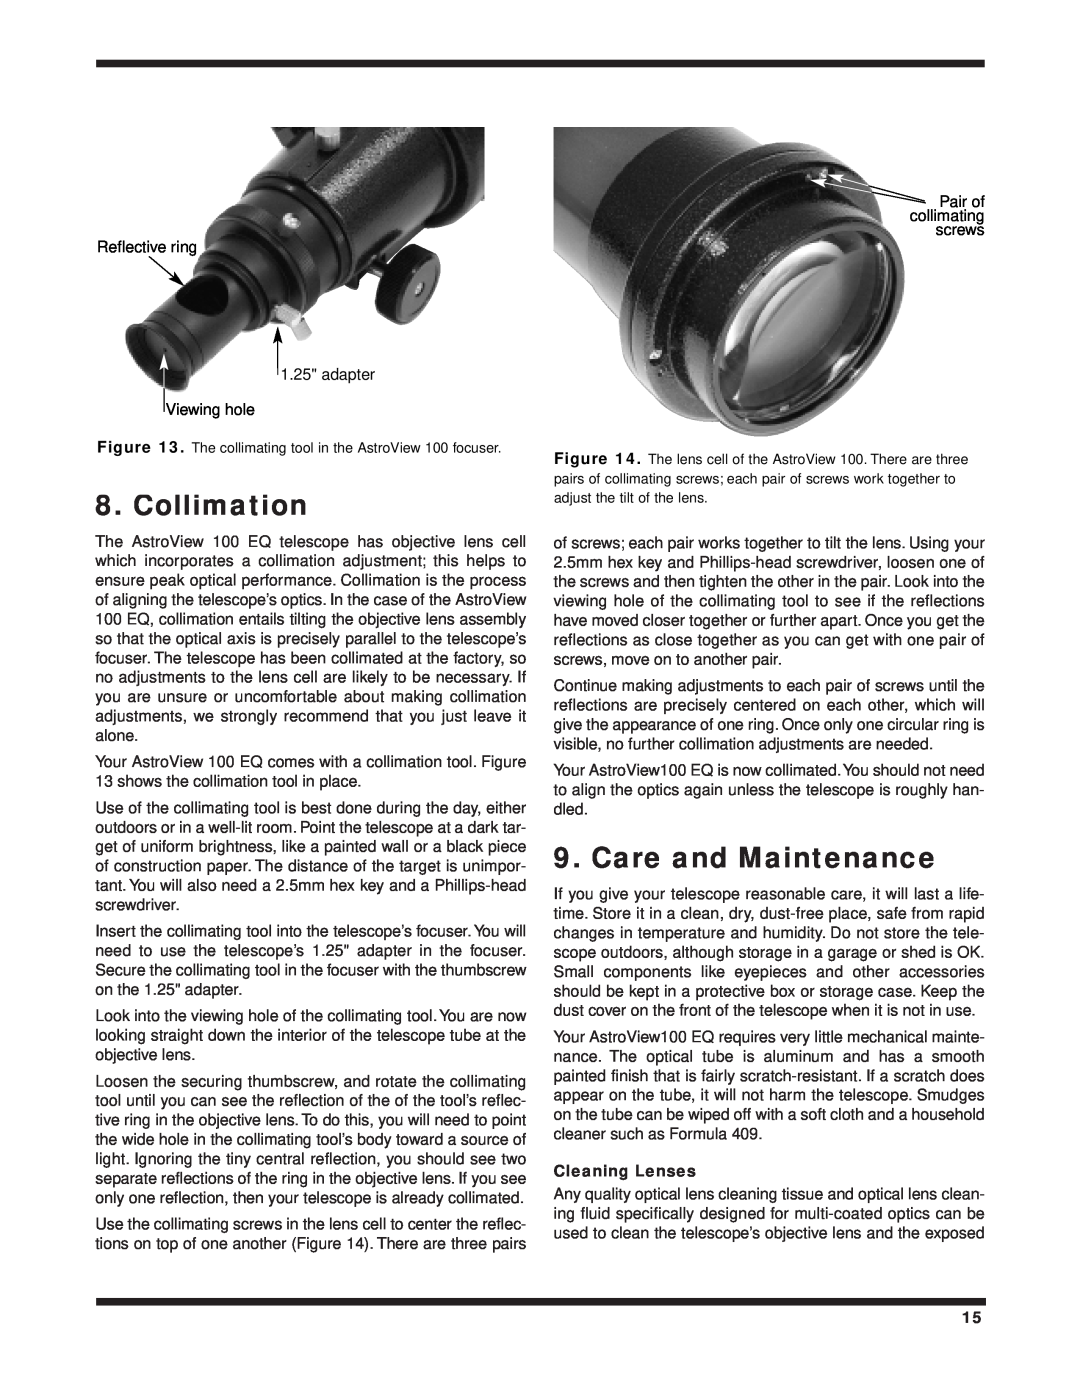 Orion 100 EQ instruction manual Collimation, Care and Maintenance, Cleaning Lenses 